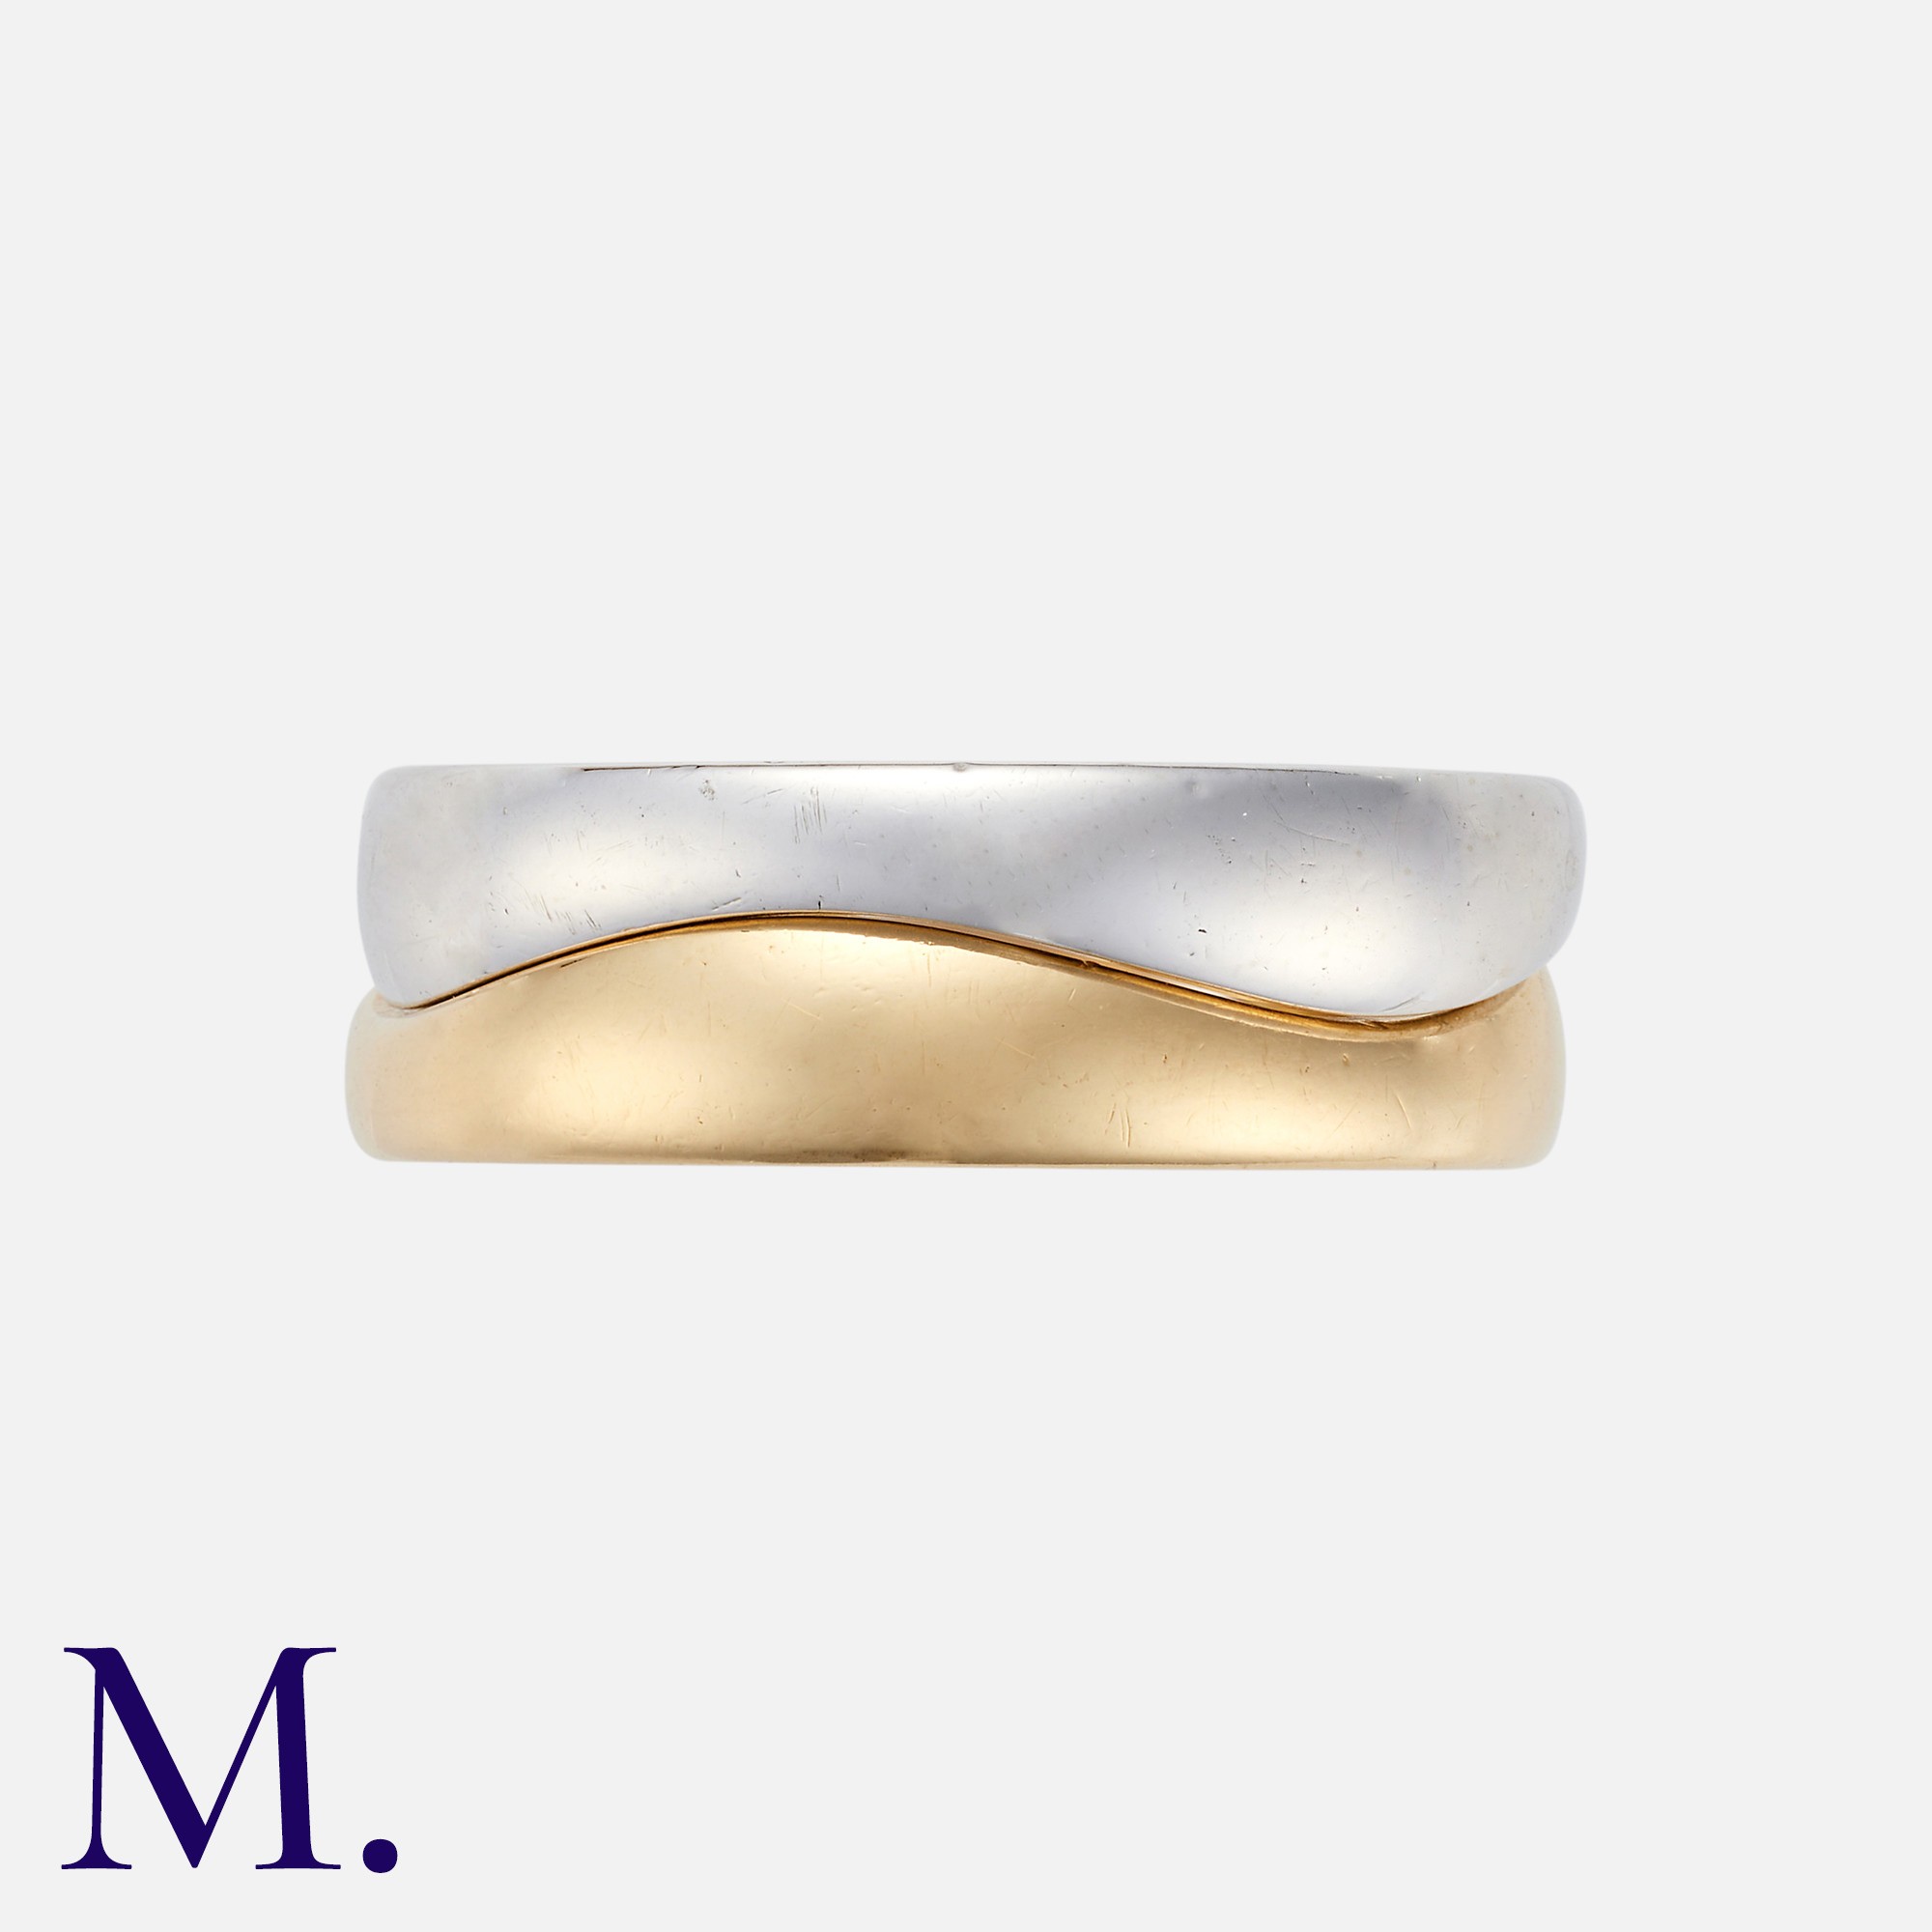 CARTIER. A Pair of Gold Wave Bands in 18K white and yellow gold, of separate interlocking bands.